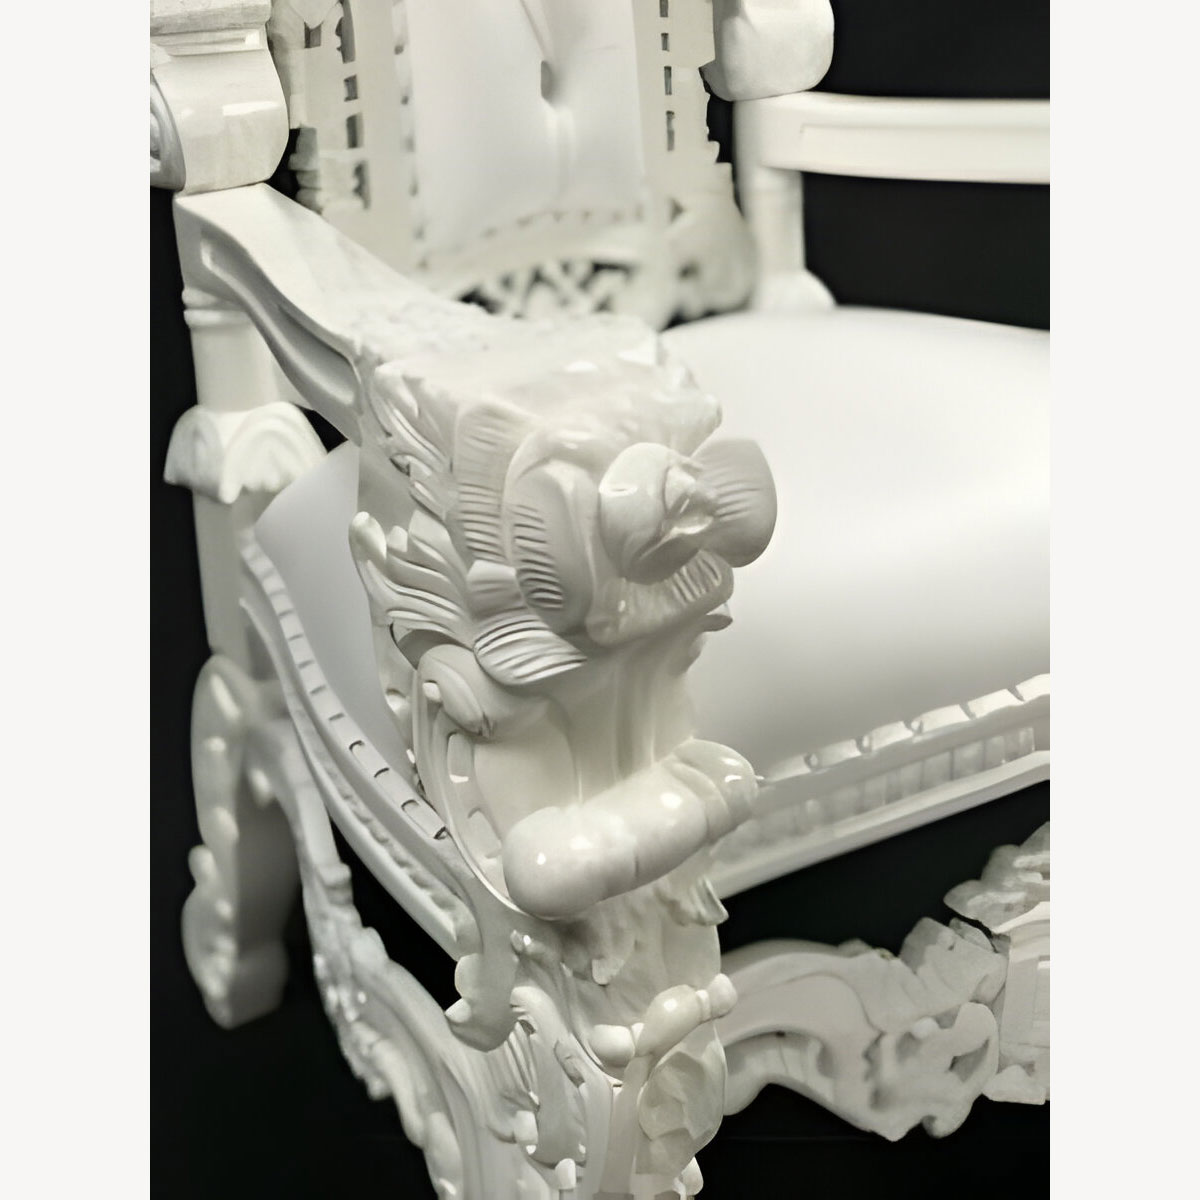 Beautiful Large Flower Rose Carved Throne Chair In Gloss Lacquered White With White Faux Leather And Crystal Buttons 6 - Hampshire Barn Interiors - Beautiful Large Flower Rose Carved Throne Chair In Gloss Lacquered White With White Faux Leather And Crystal Buttons -